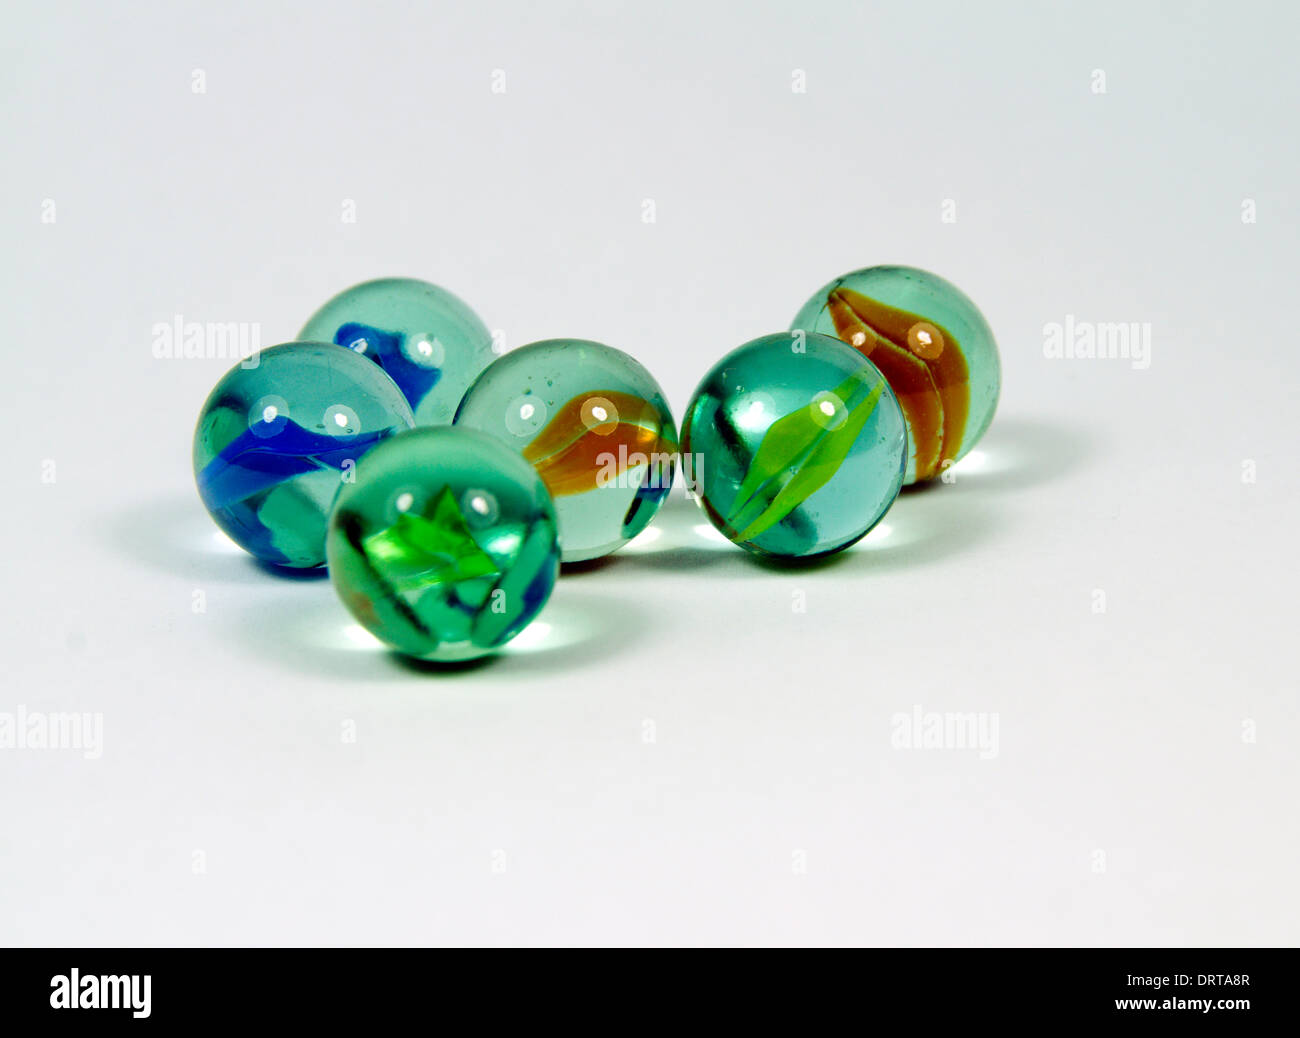 Glass marbles. Stock Photo